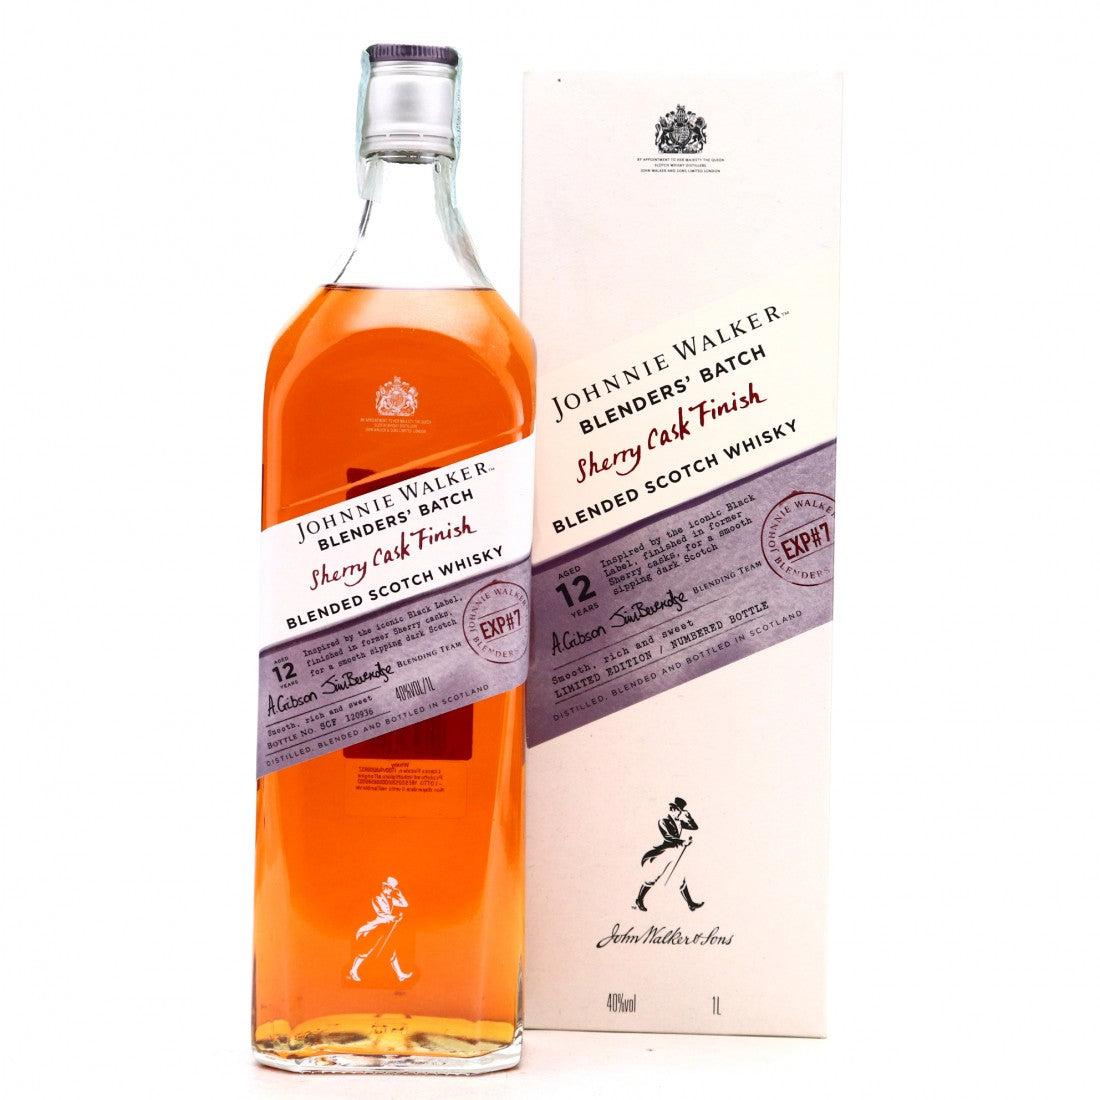 Johnnie Walker Limited Edition Blenders Batch Sherry Cask Finish 12 Year Old Blended Scotch Whisky 1L